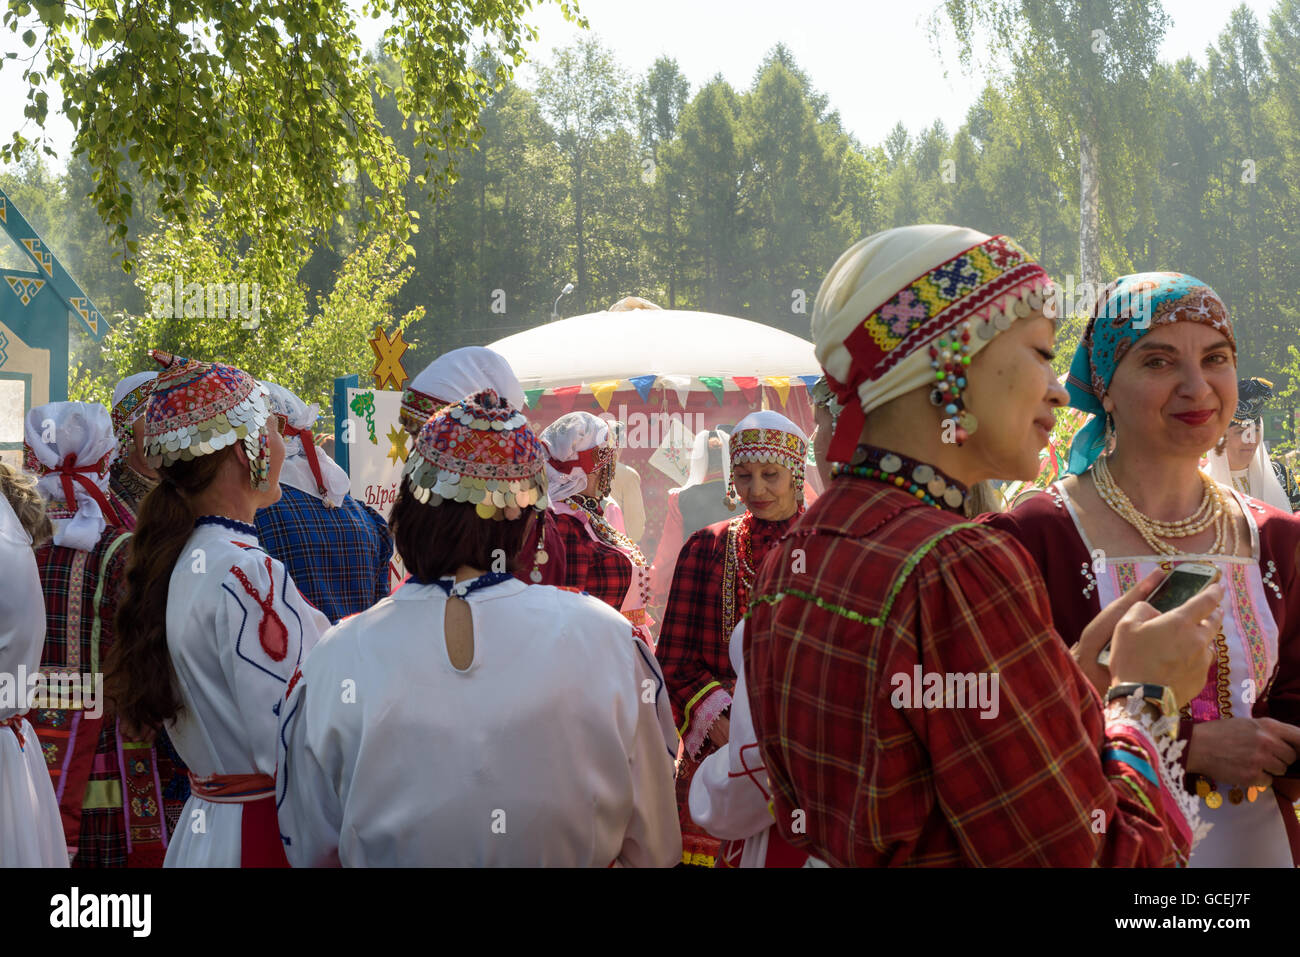 Russians celebrate Sabantuy by wearing Bashkir and Tartar ethnic traditional dresses and costumes Stock Photo